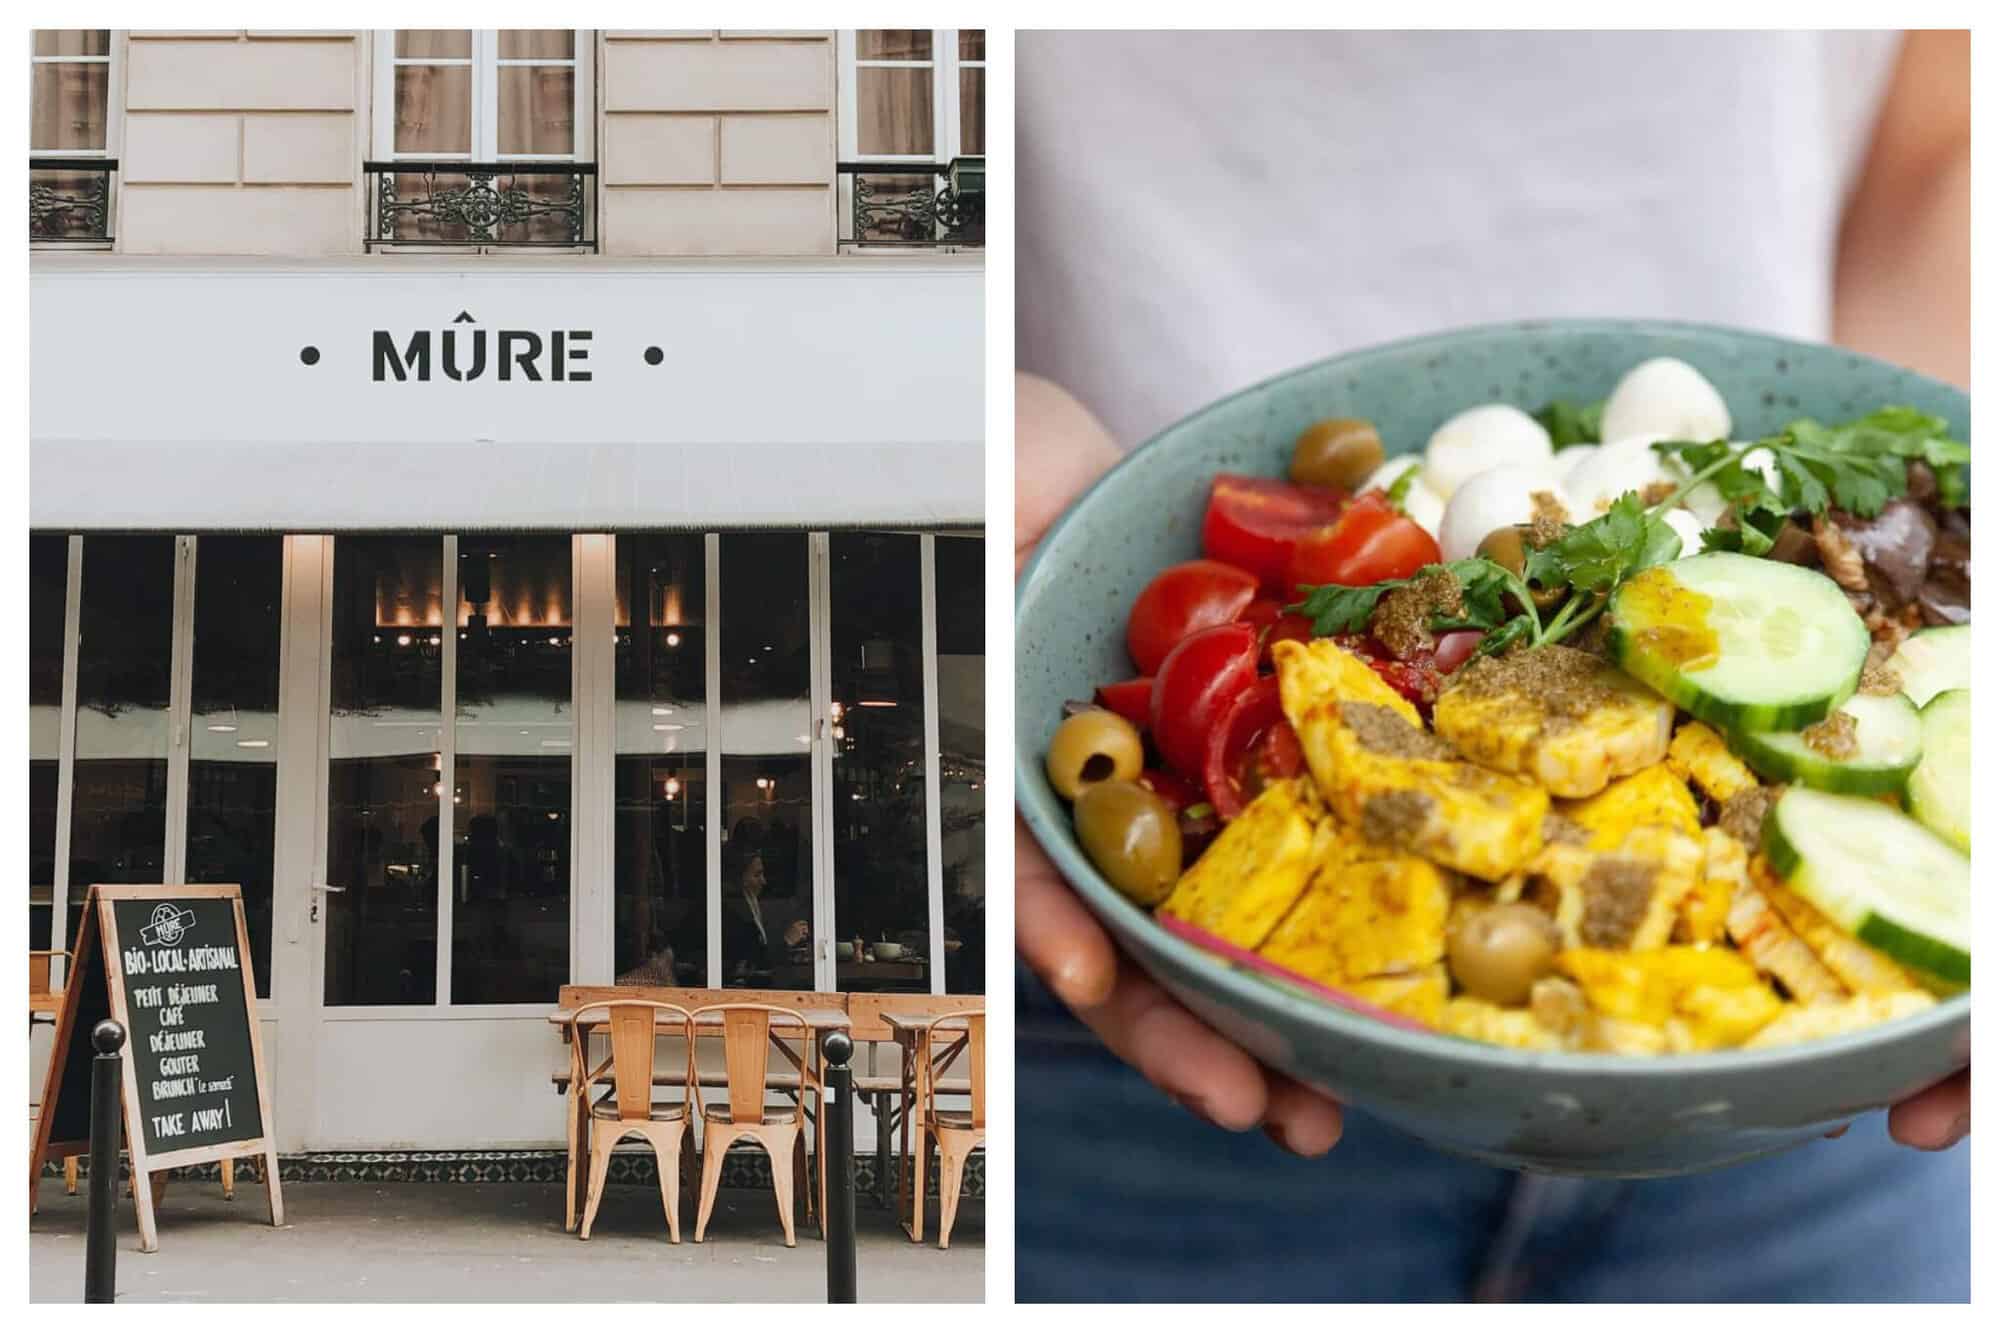 (Left) The outside of Mure restaurant with a white exterior and wooden tables. / (Right) A salad made with green olives, cucumber, tomatoes and cilantro toppings in a blue bowl. 